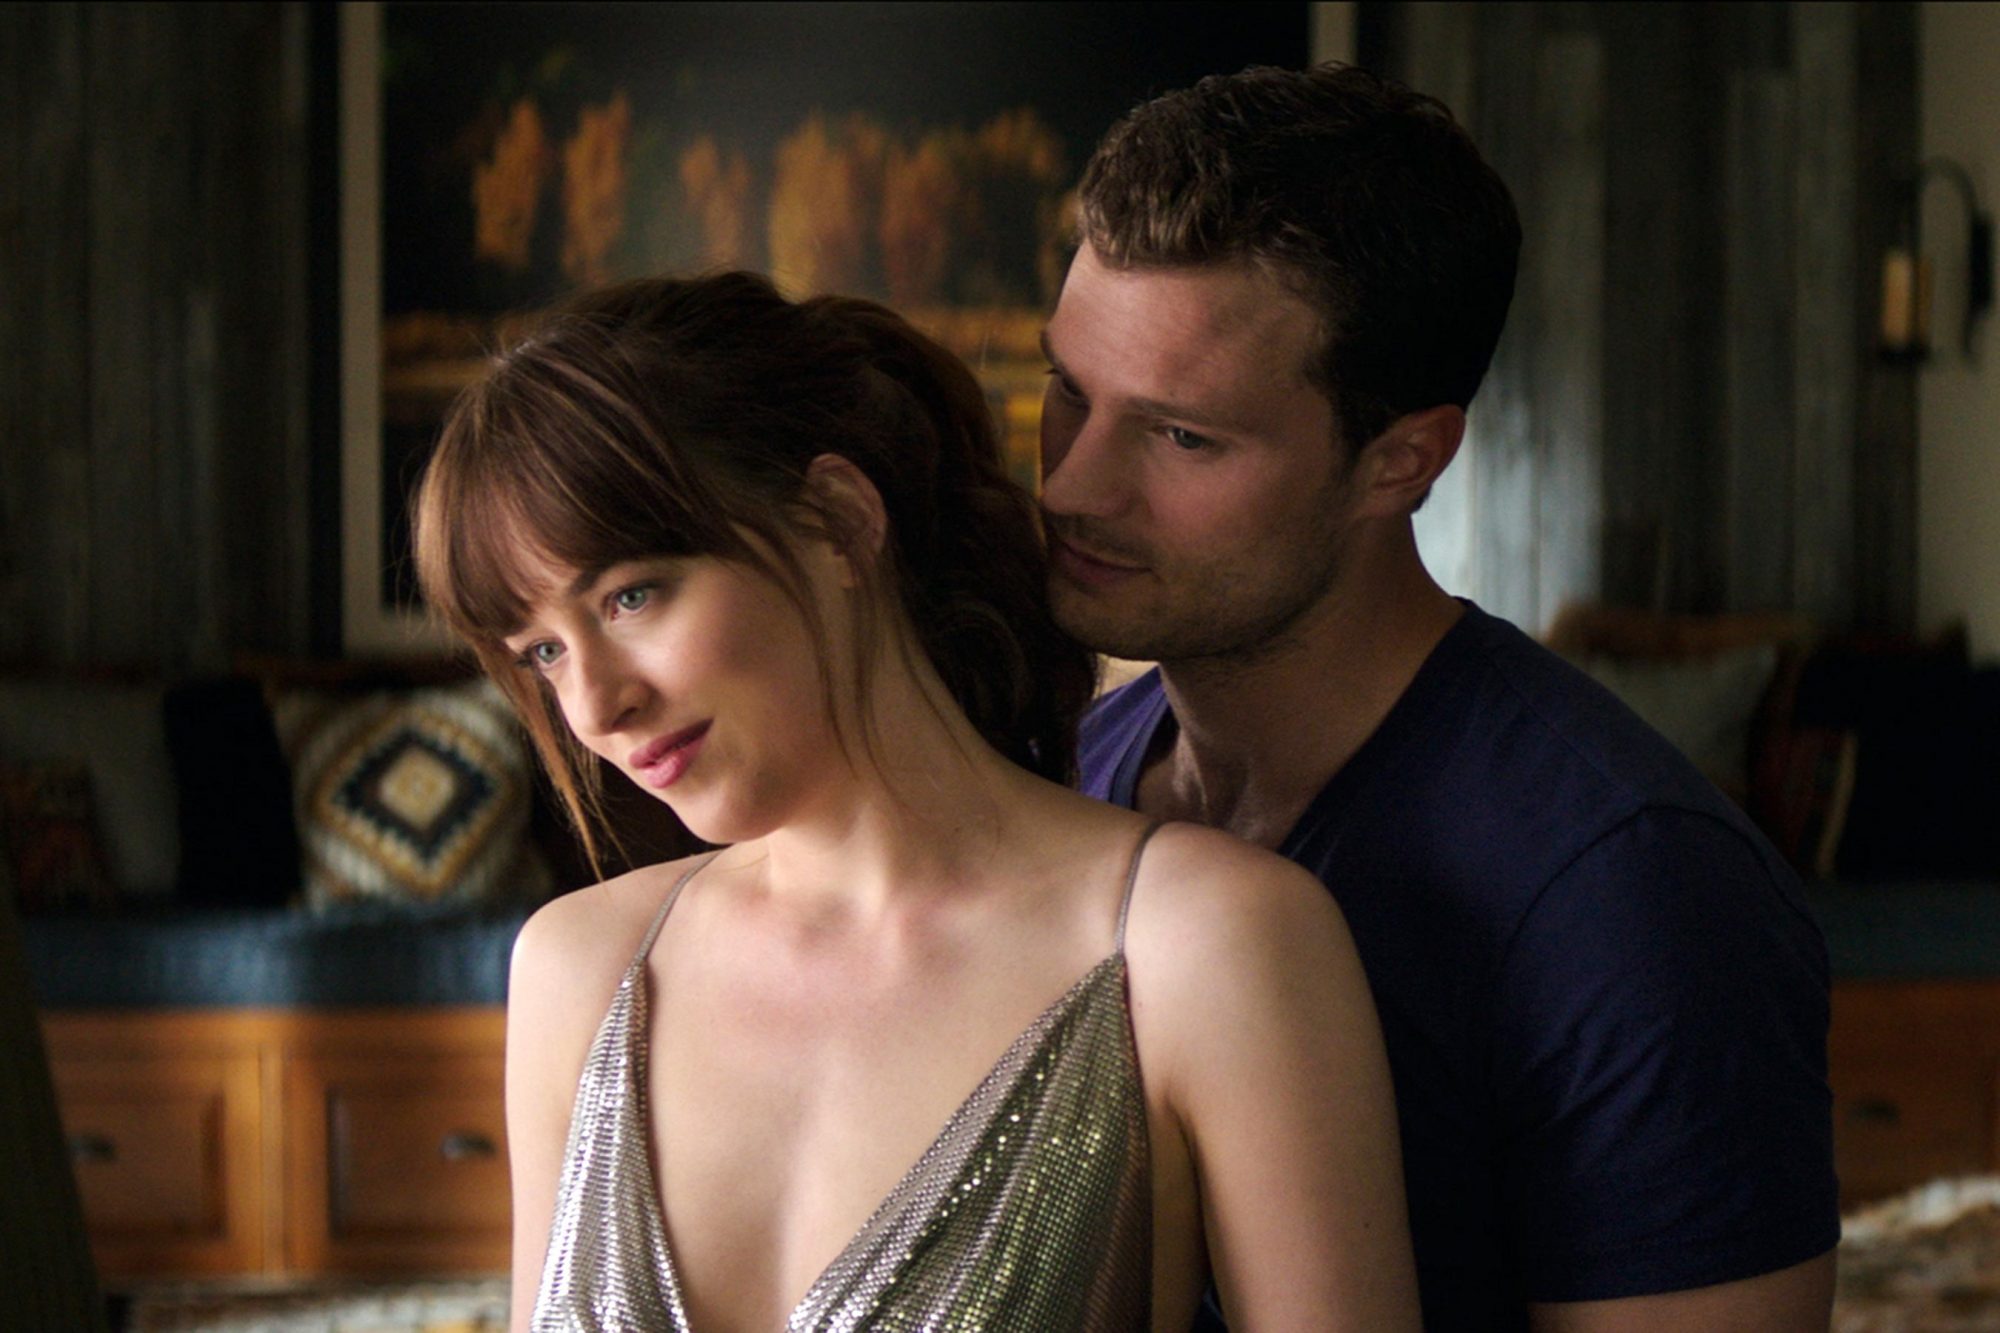 Dakota Johnson says Th0ngs were superglued to her Body while filming 'Fifty...